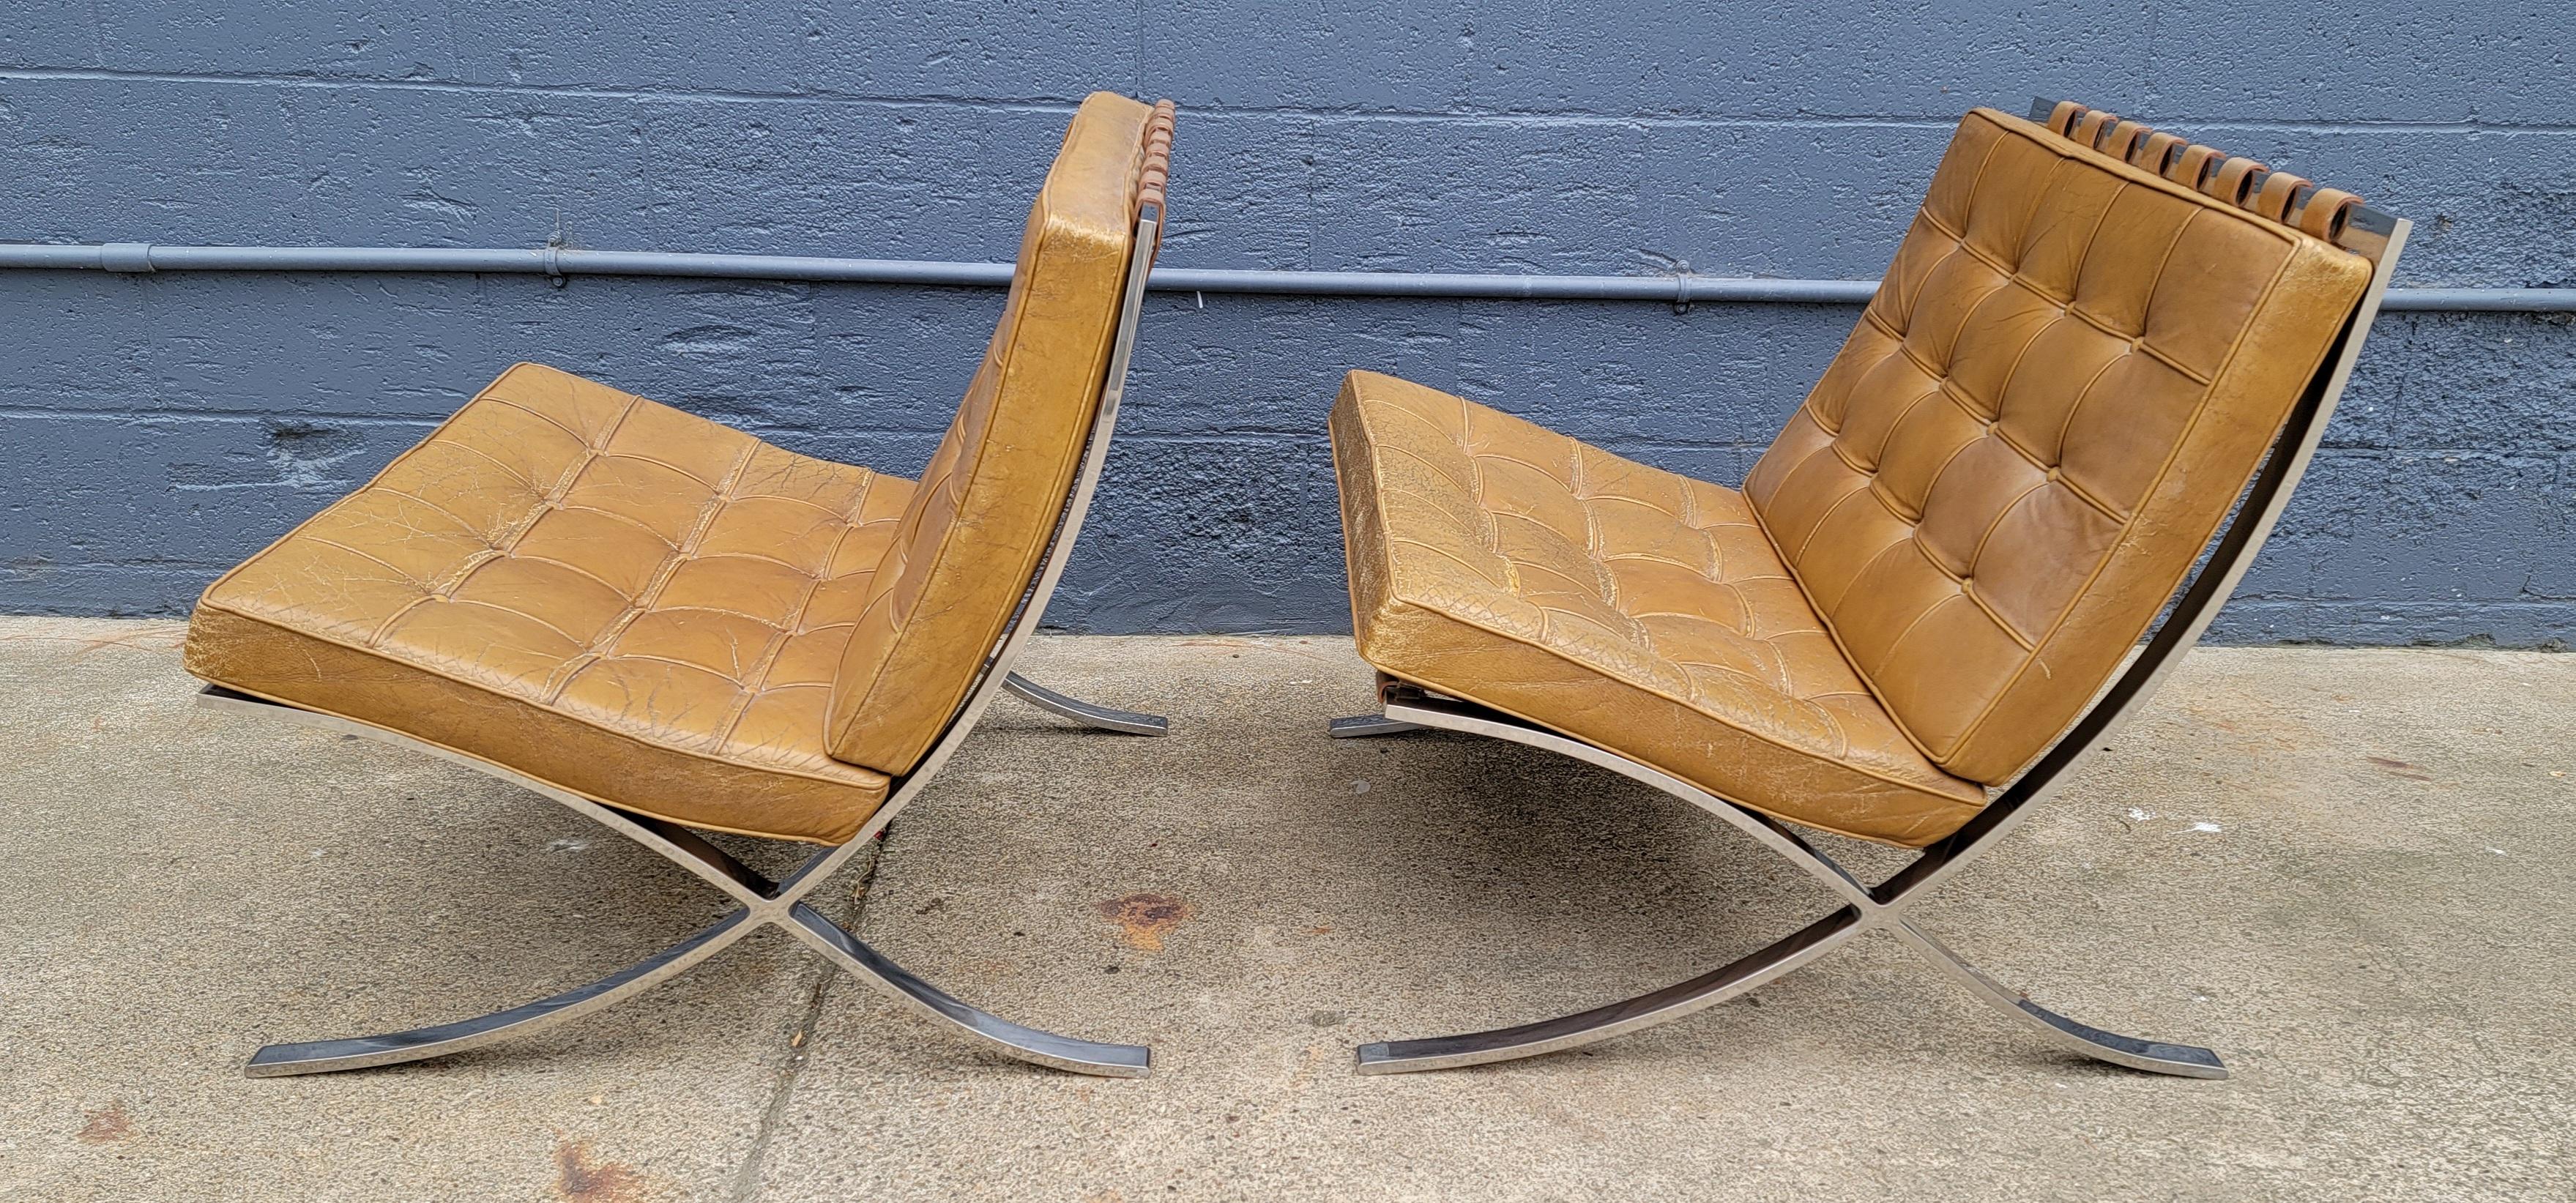 20th Century Mies Van Der Rohe for Knoll Barcelona Chairs a Pair circa, 1960's